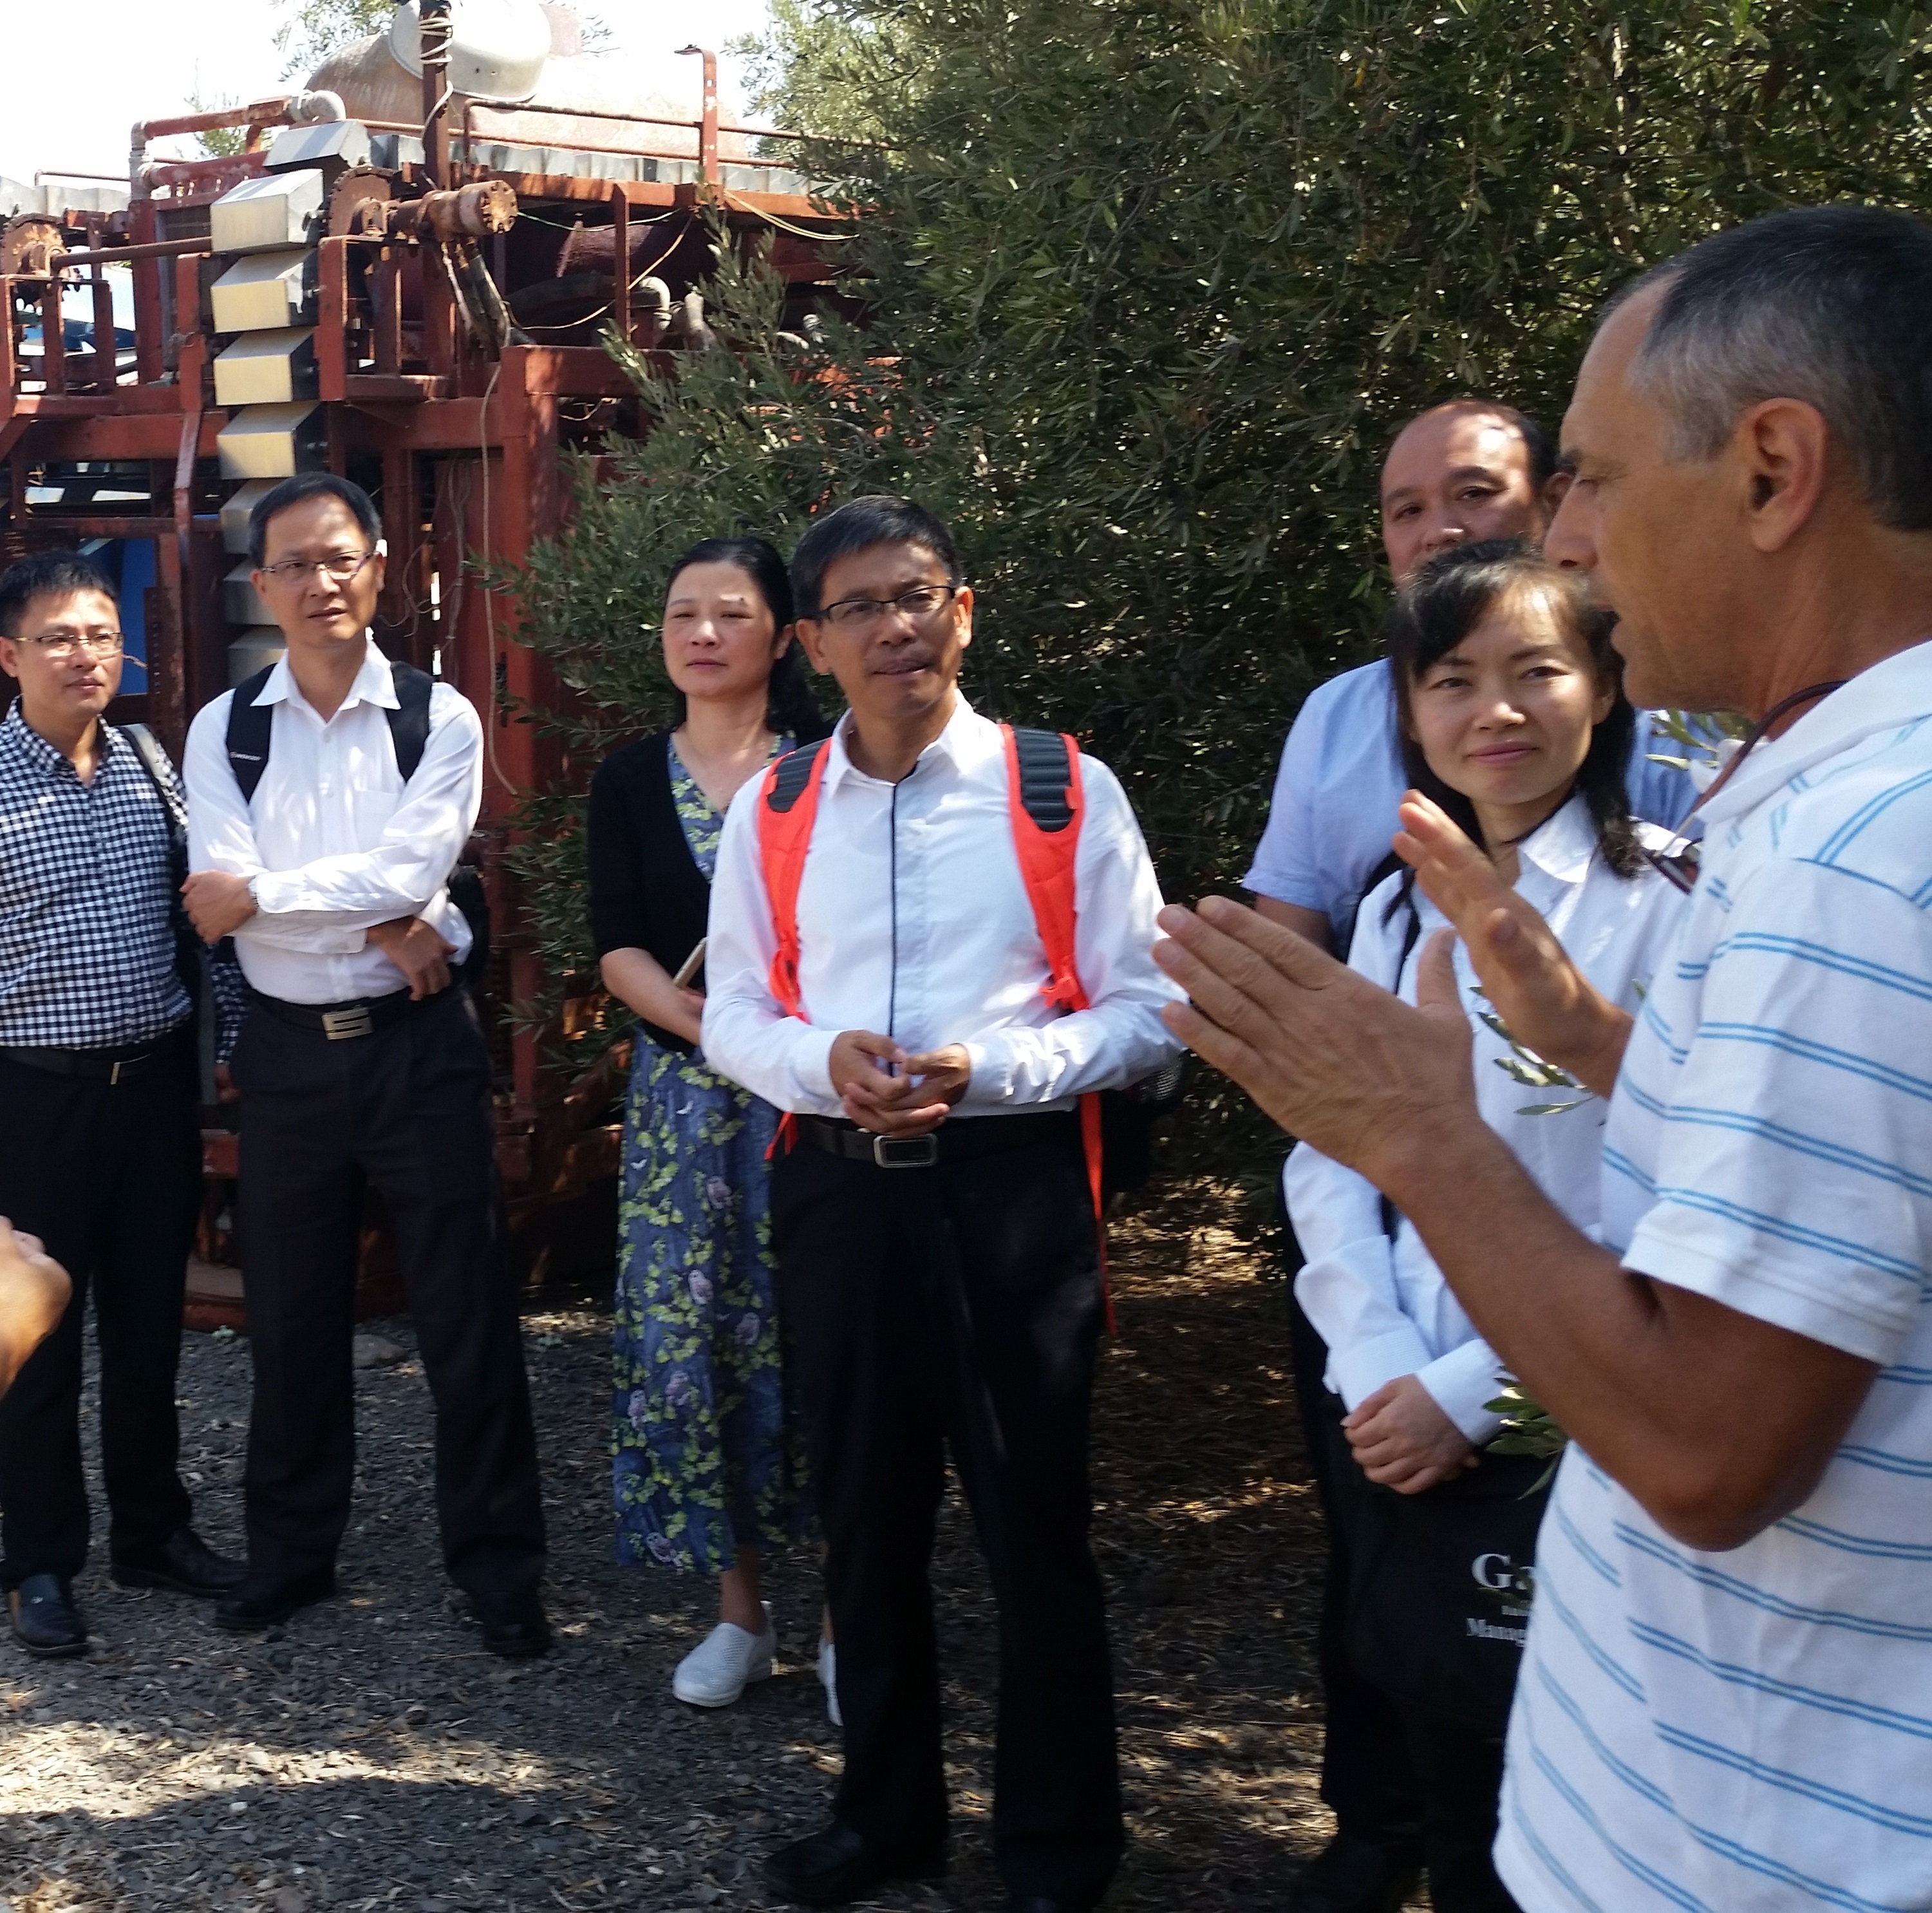 A tour of water and environmental issues in agriculture - Environmental course at Galilee College 10.9.17